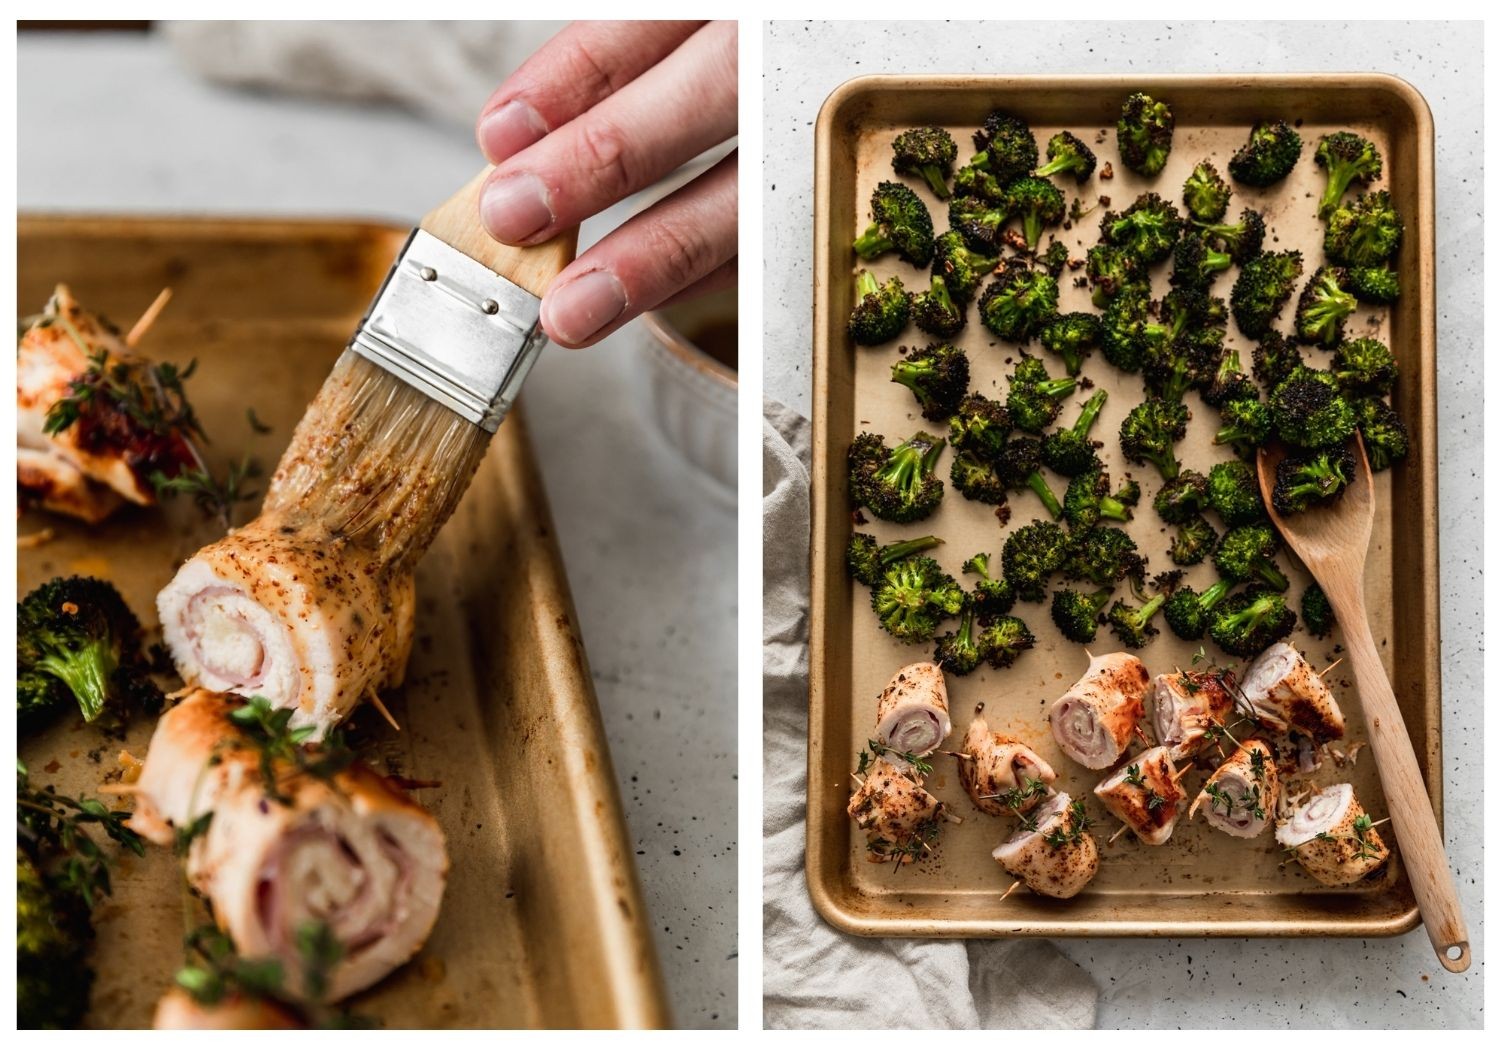 Two images; on the left, a side shot of a man's hand brushing rolled chicken on a gold sheet pan with sauce. On the right, an overhead of a sheet pan with broccoli and rolled chicken on a grey table.